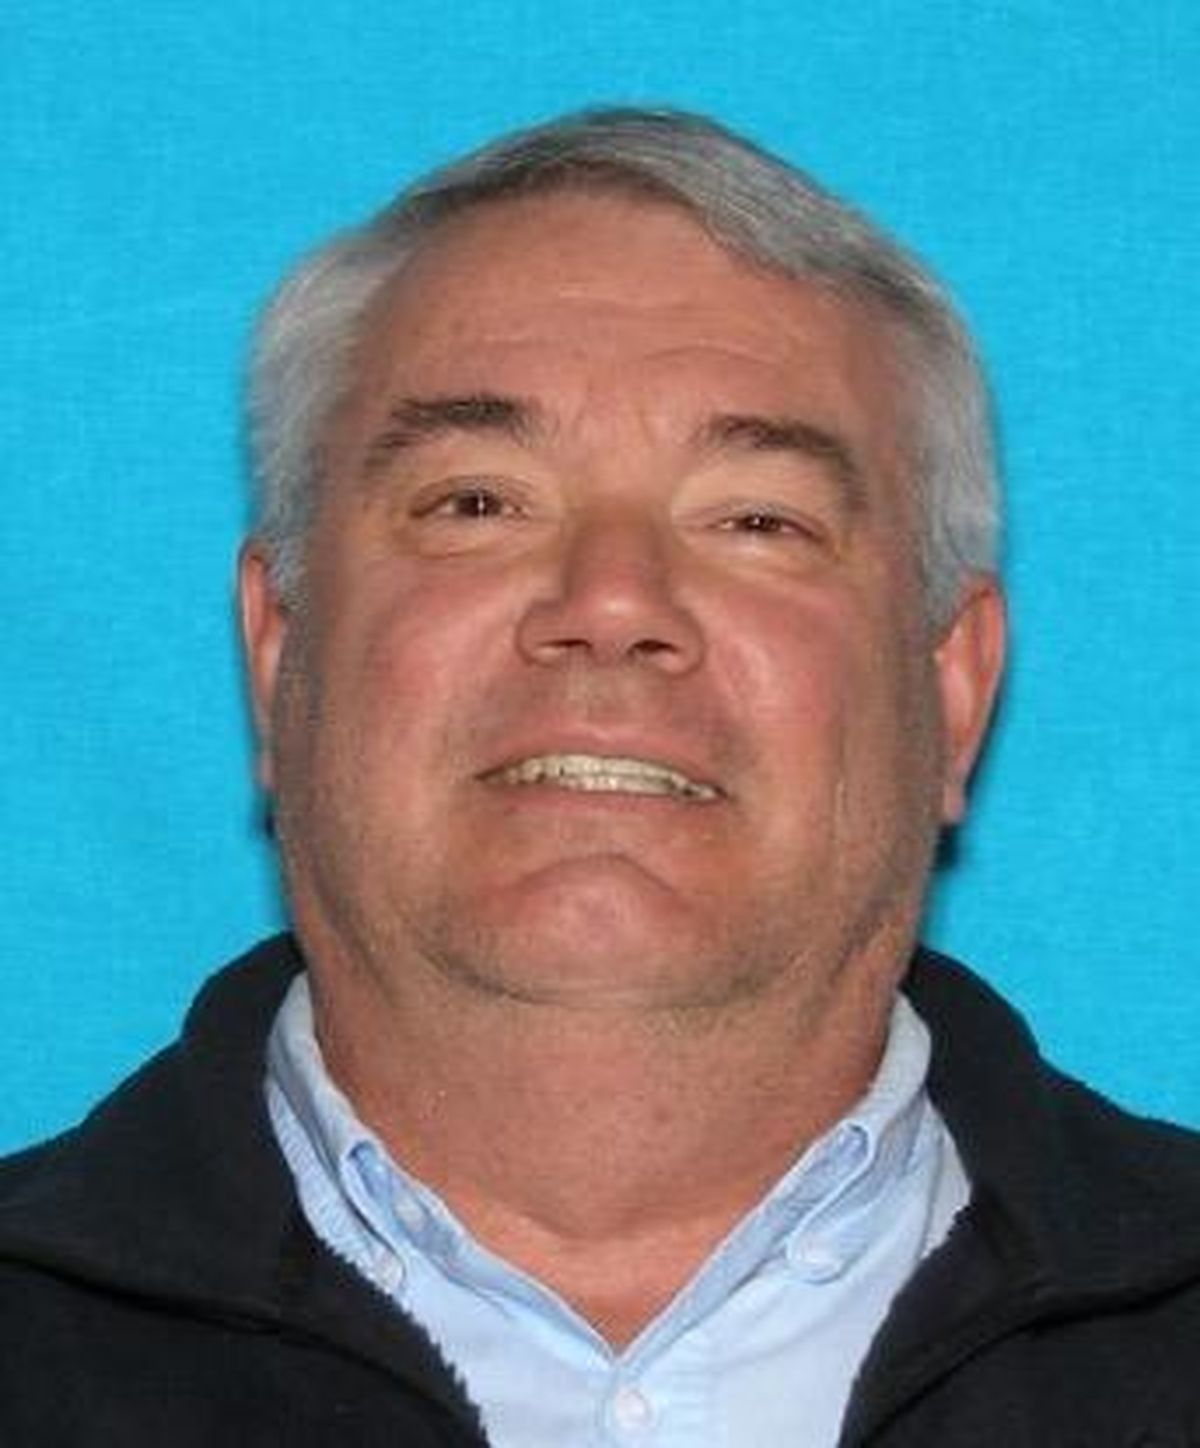 In this undated photo released by the Canyon County Sheriff’s office shows suspect Gerald “Mike” Bullinger, formerly of Ogden, Utah. Canyon County Sheriffs Chief Deputy Marv Dashiell says Bullinger is considered a person of interest in the murders discovered Monday, June 19, 2017 at a Caldwell, Idaho home. A sheriffs deputy found the bodies hidden in a shed after family members from out-of-state called to ask that someone check on Bullinger and other family members who had recently moved to the tiny Idaho farmhouse. (Canyon County Sheriff / Canyon County Sheriff)